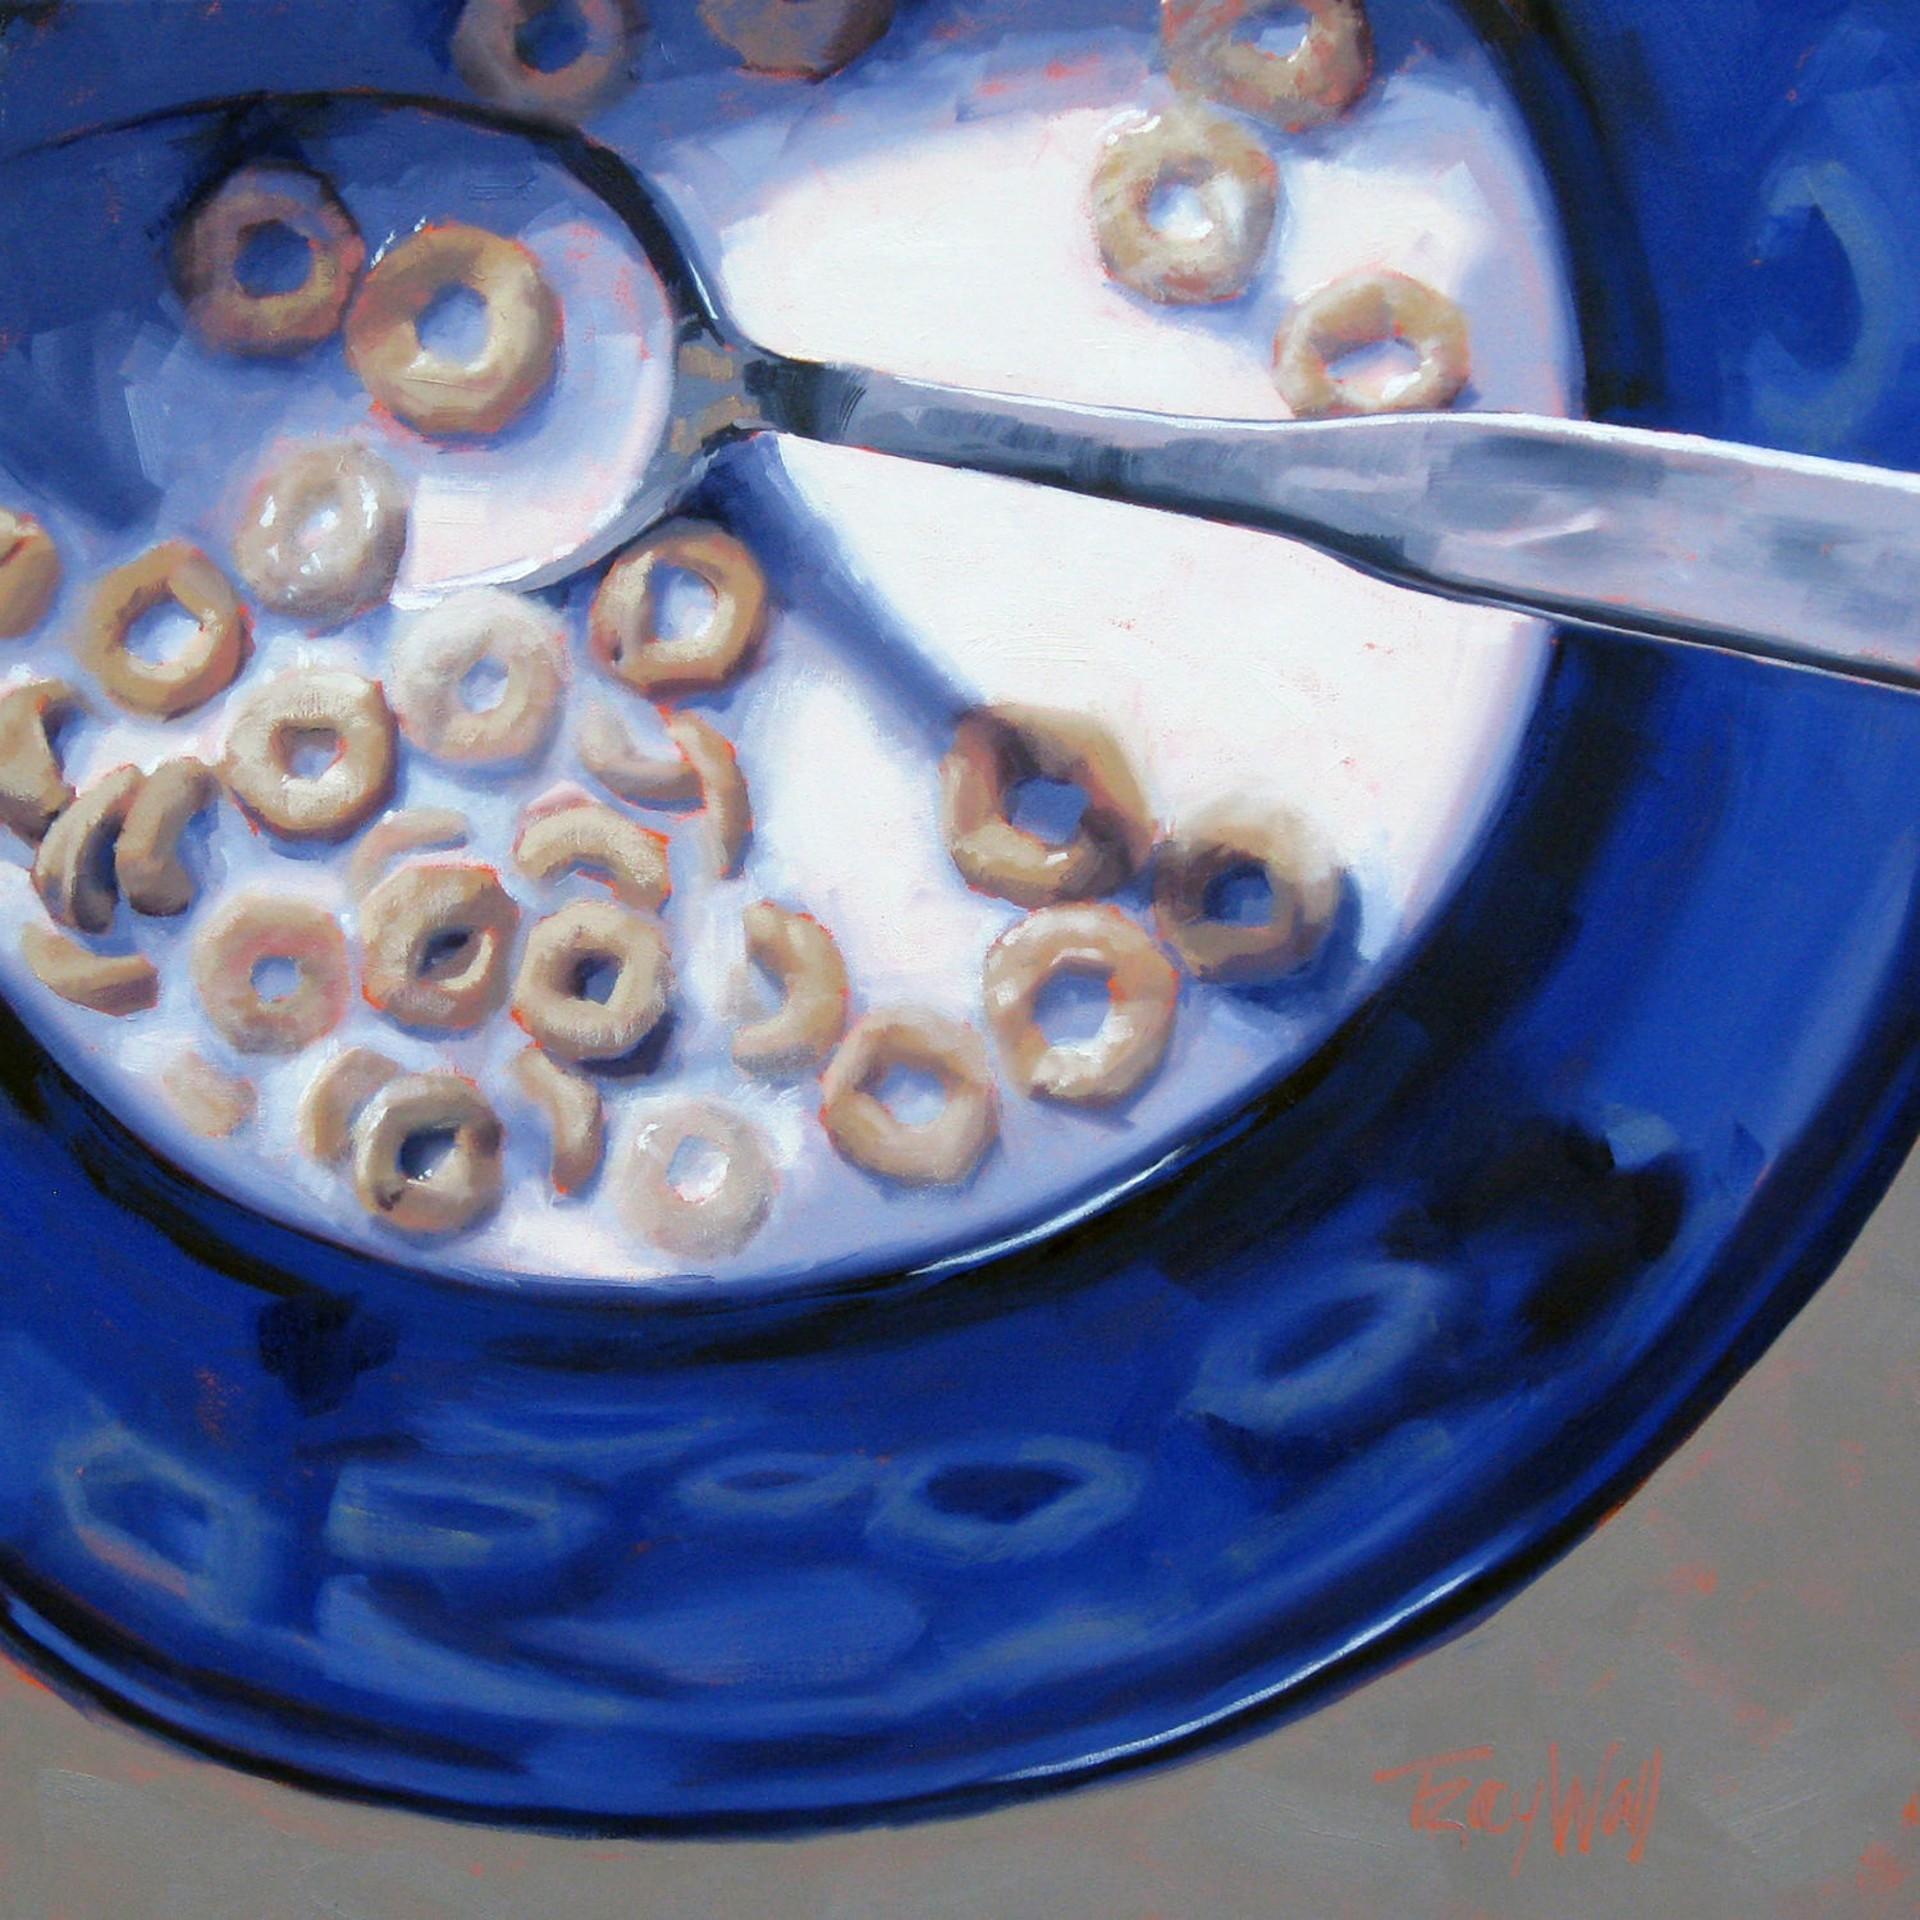 Where in the Bowl Are You? - Art by Tracy Wall